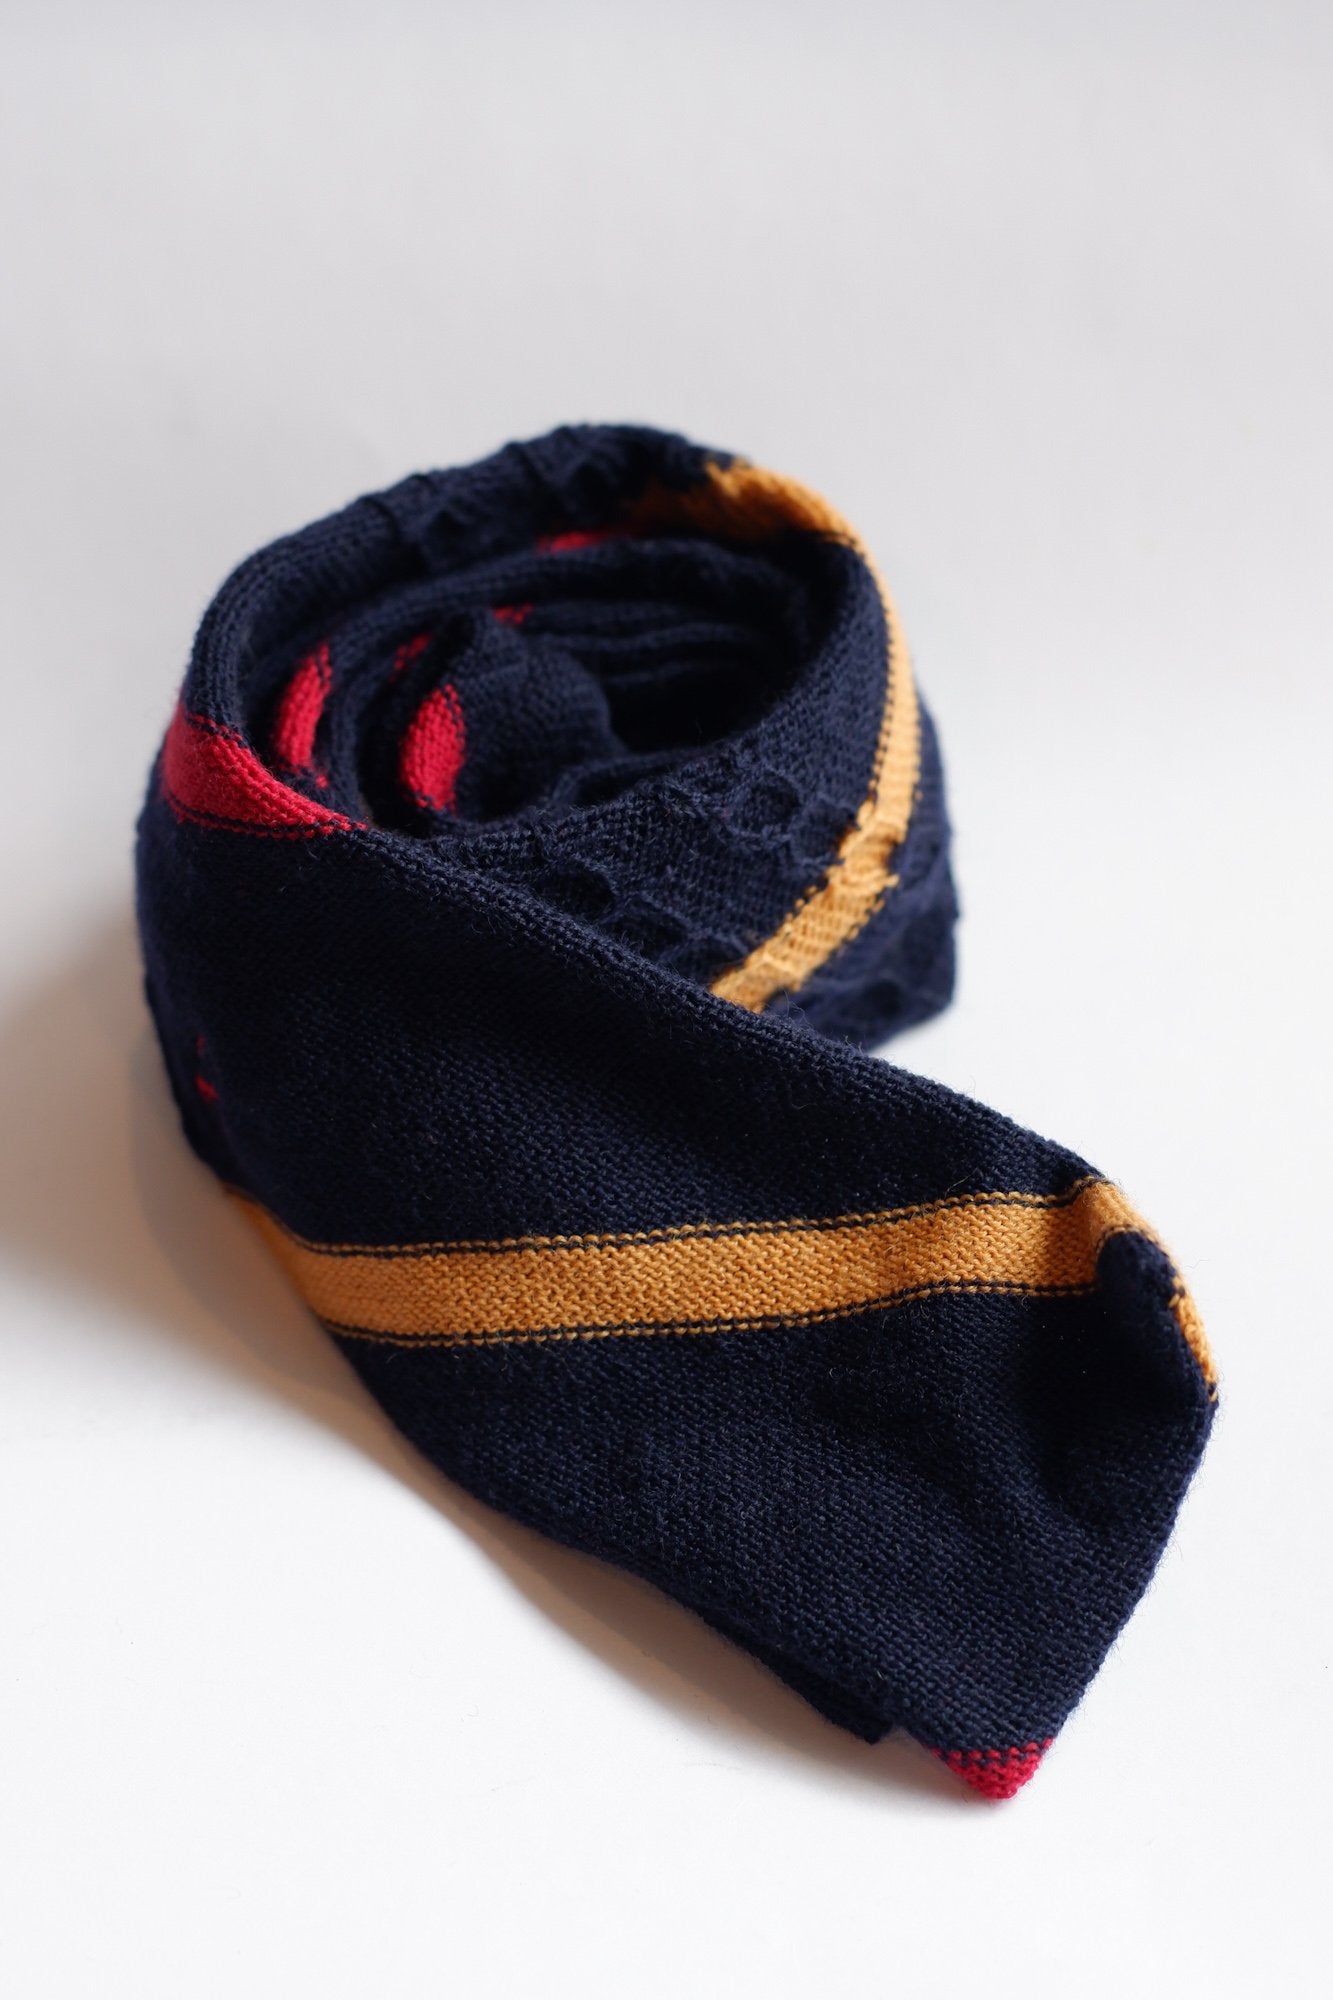 Valentino Navy with Red and Yellow Stripes Knitted Necktie